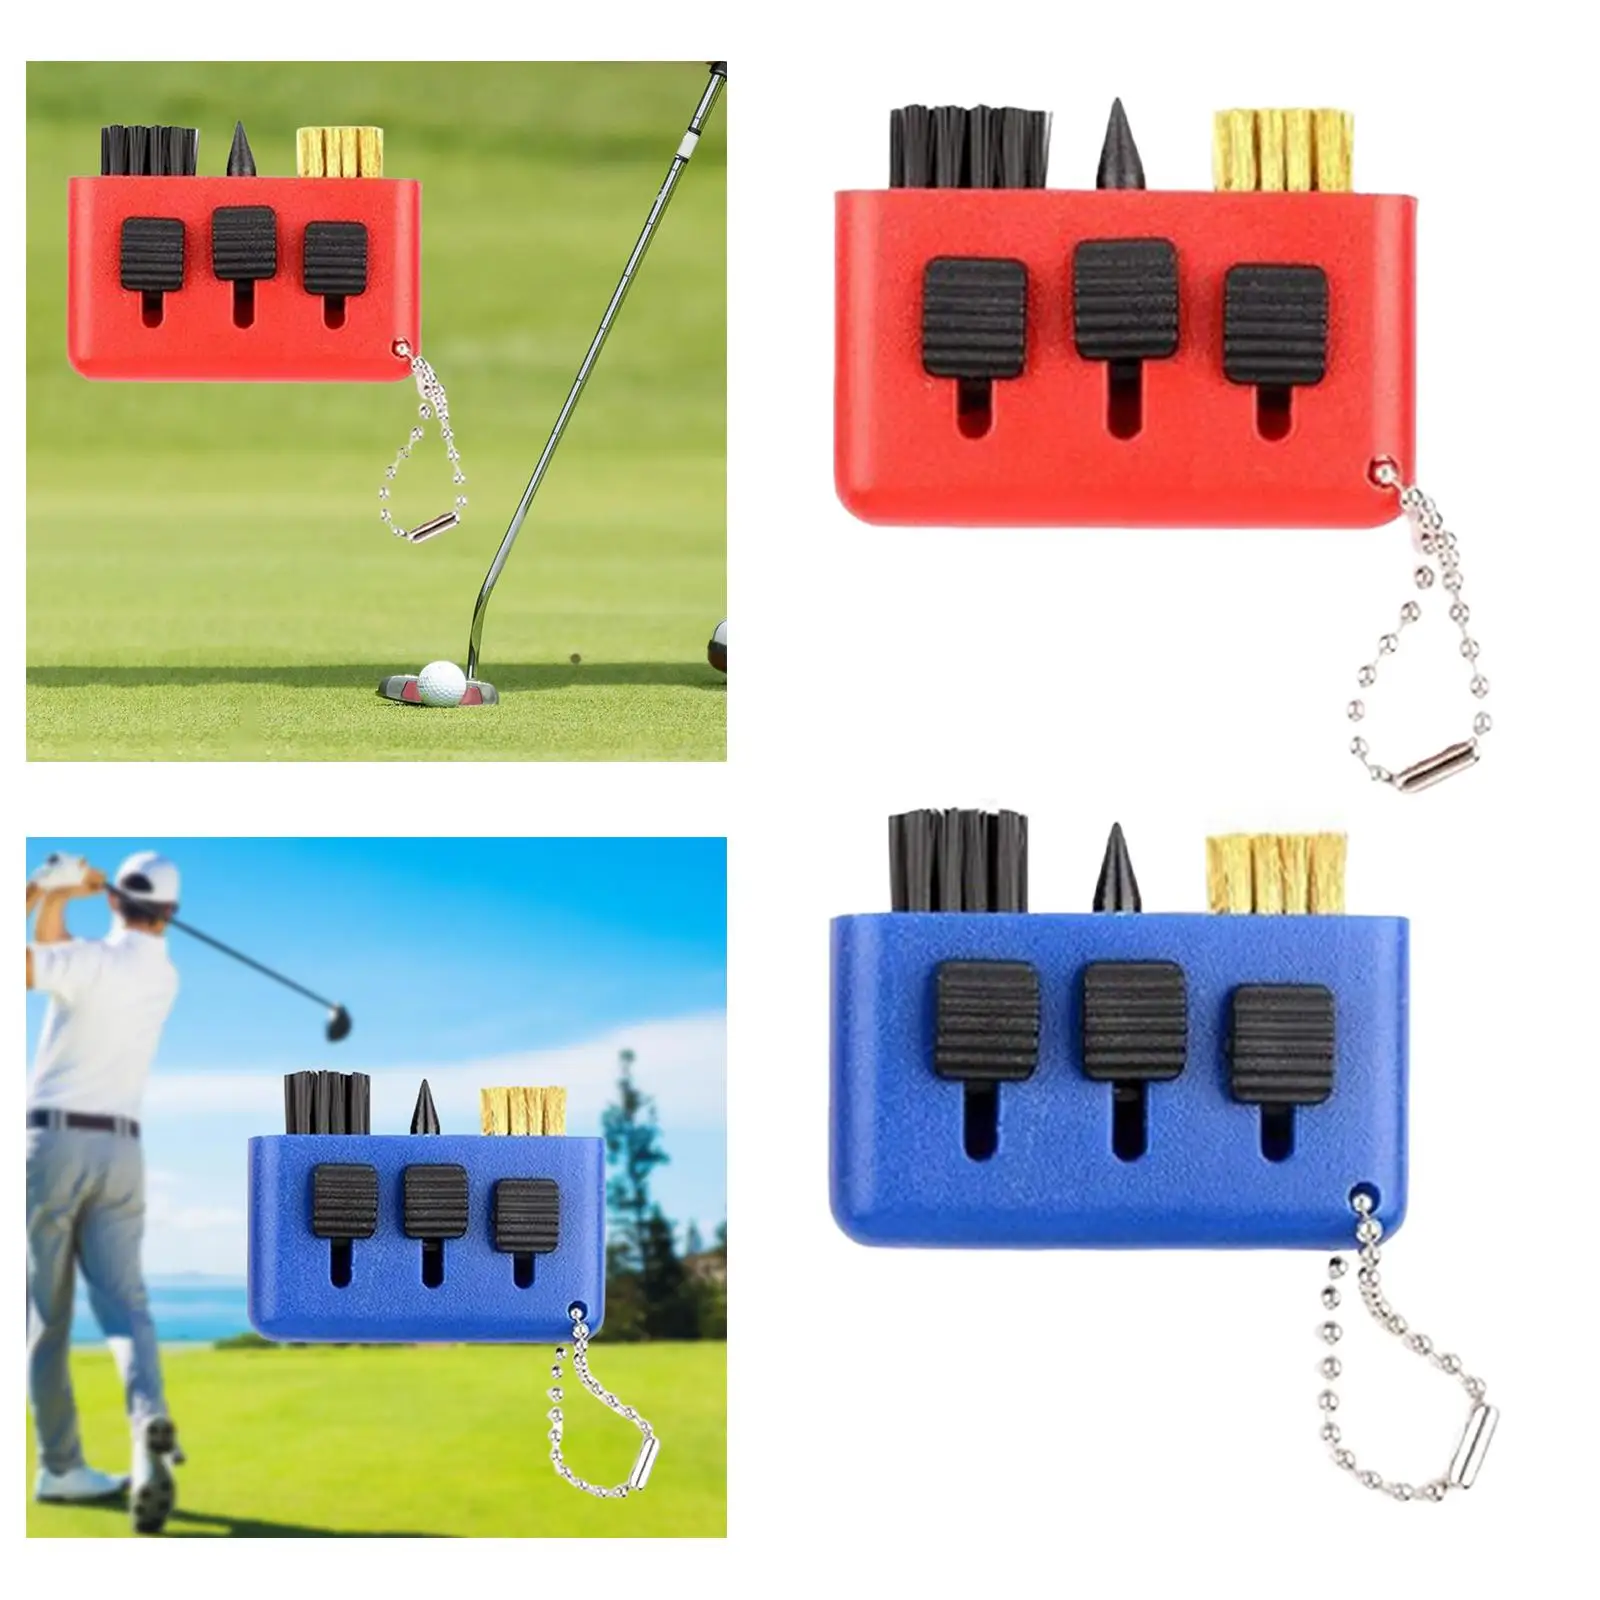 Golf Club Cleaning Brush Portable 3 in 1 Pocket for Wood Irons Clubs Grooves Golf Club Accessories Easy to Use Golf Ball Brush